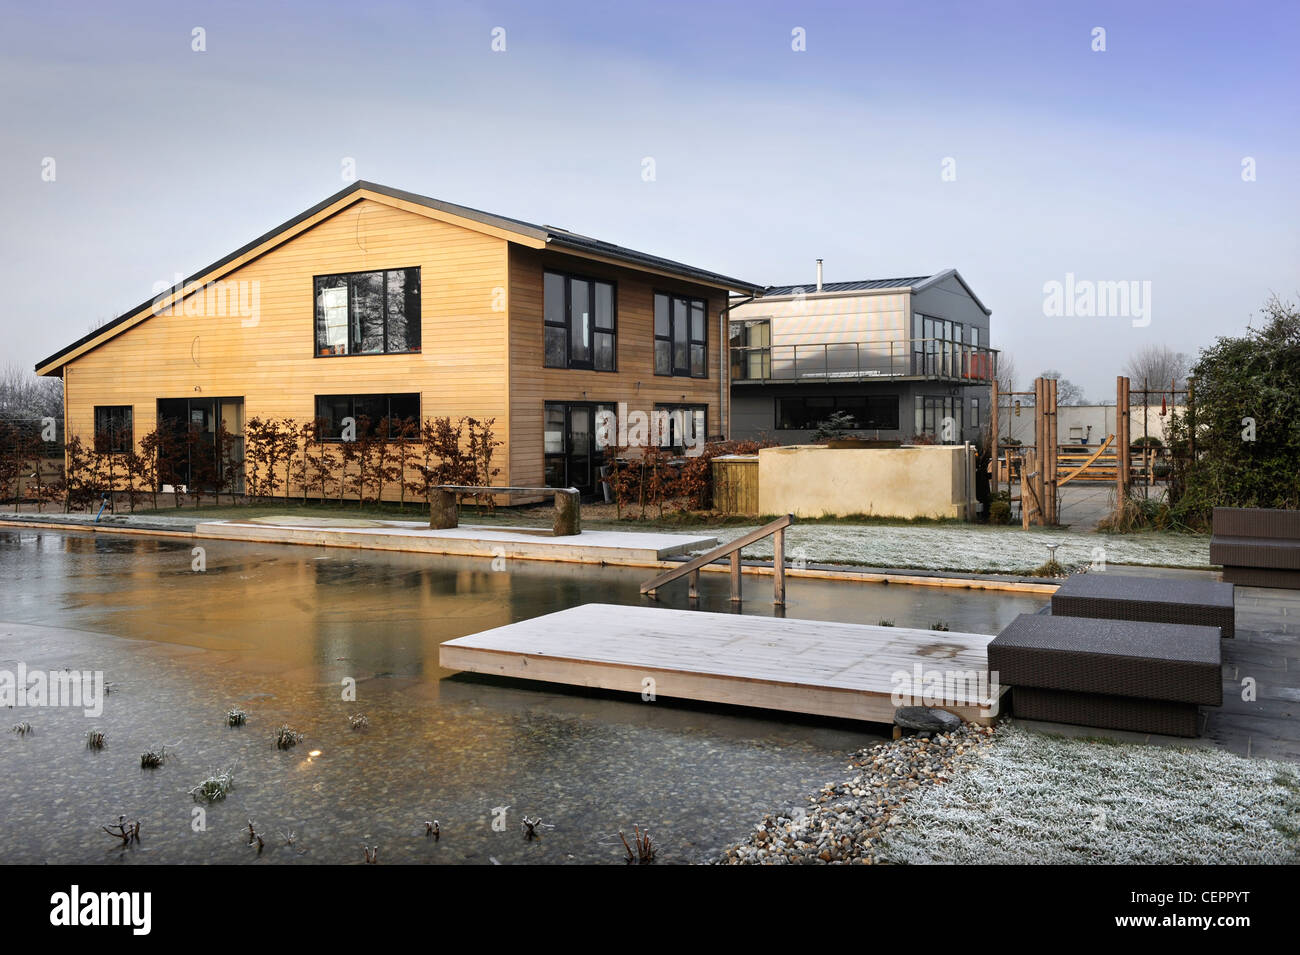 A natural swimming pool which has iced over in winter at a self build wooden clad home UK Stock Photo